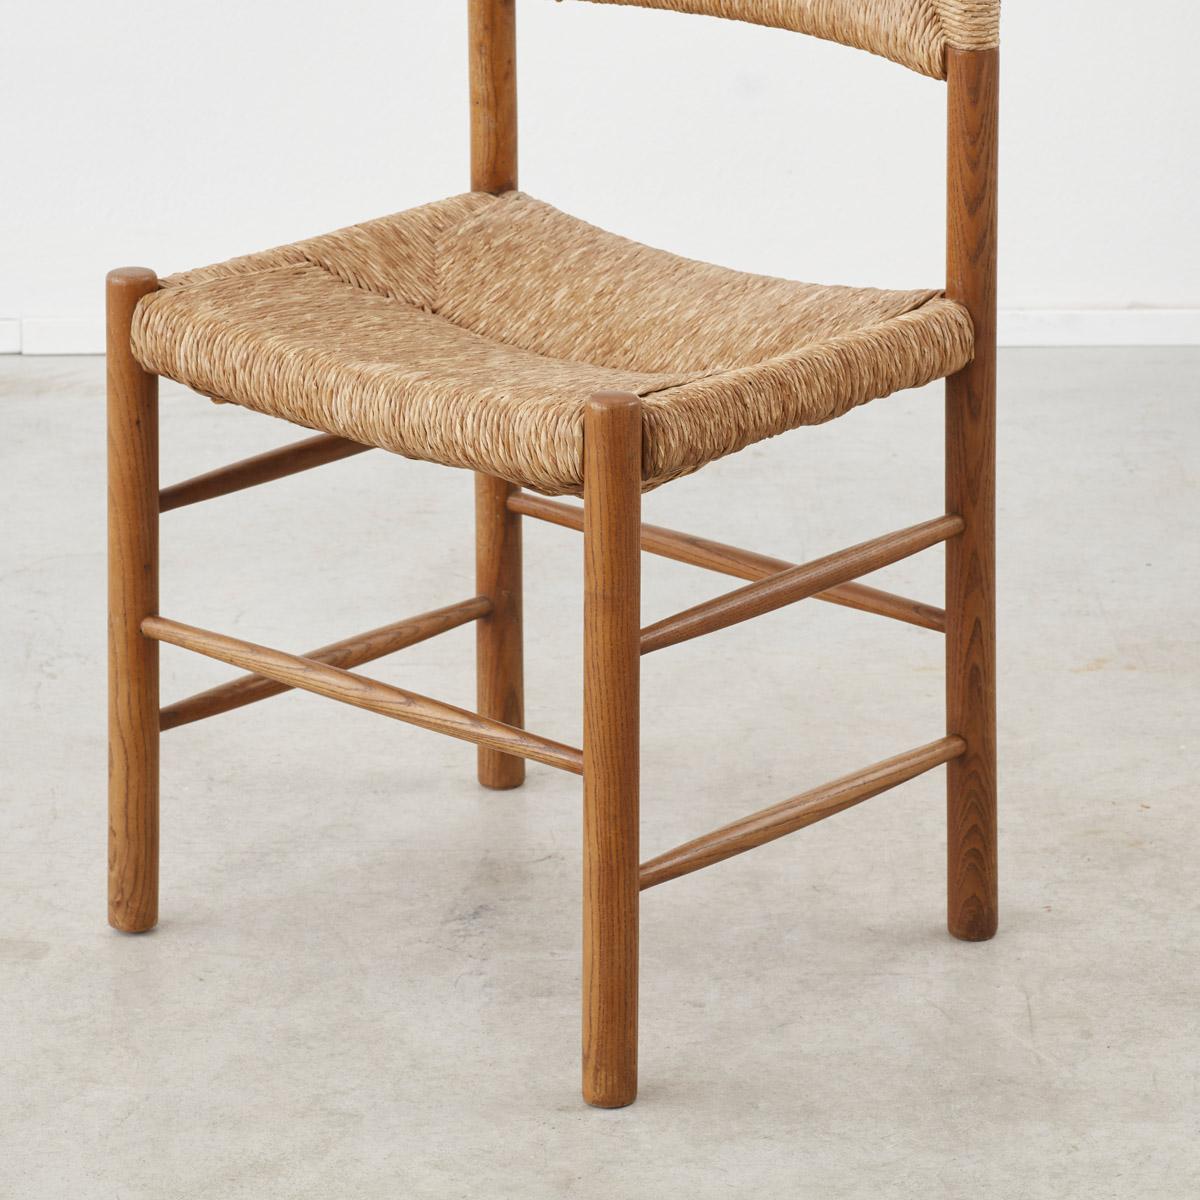 Pair of Charlotte Perriand Dordogne Chairs for Robert Sentou, France c1950 For Sale 2